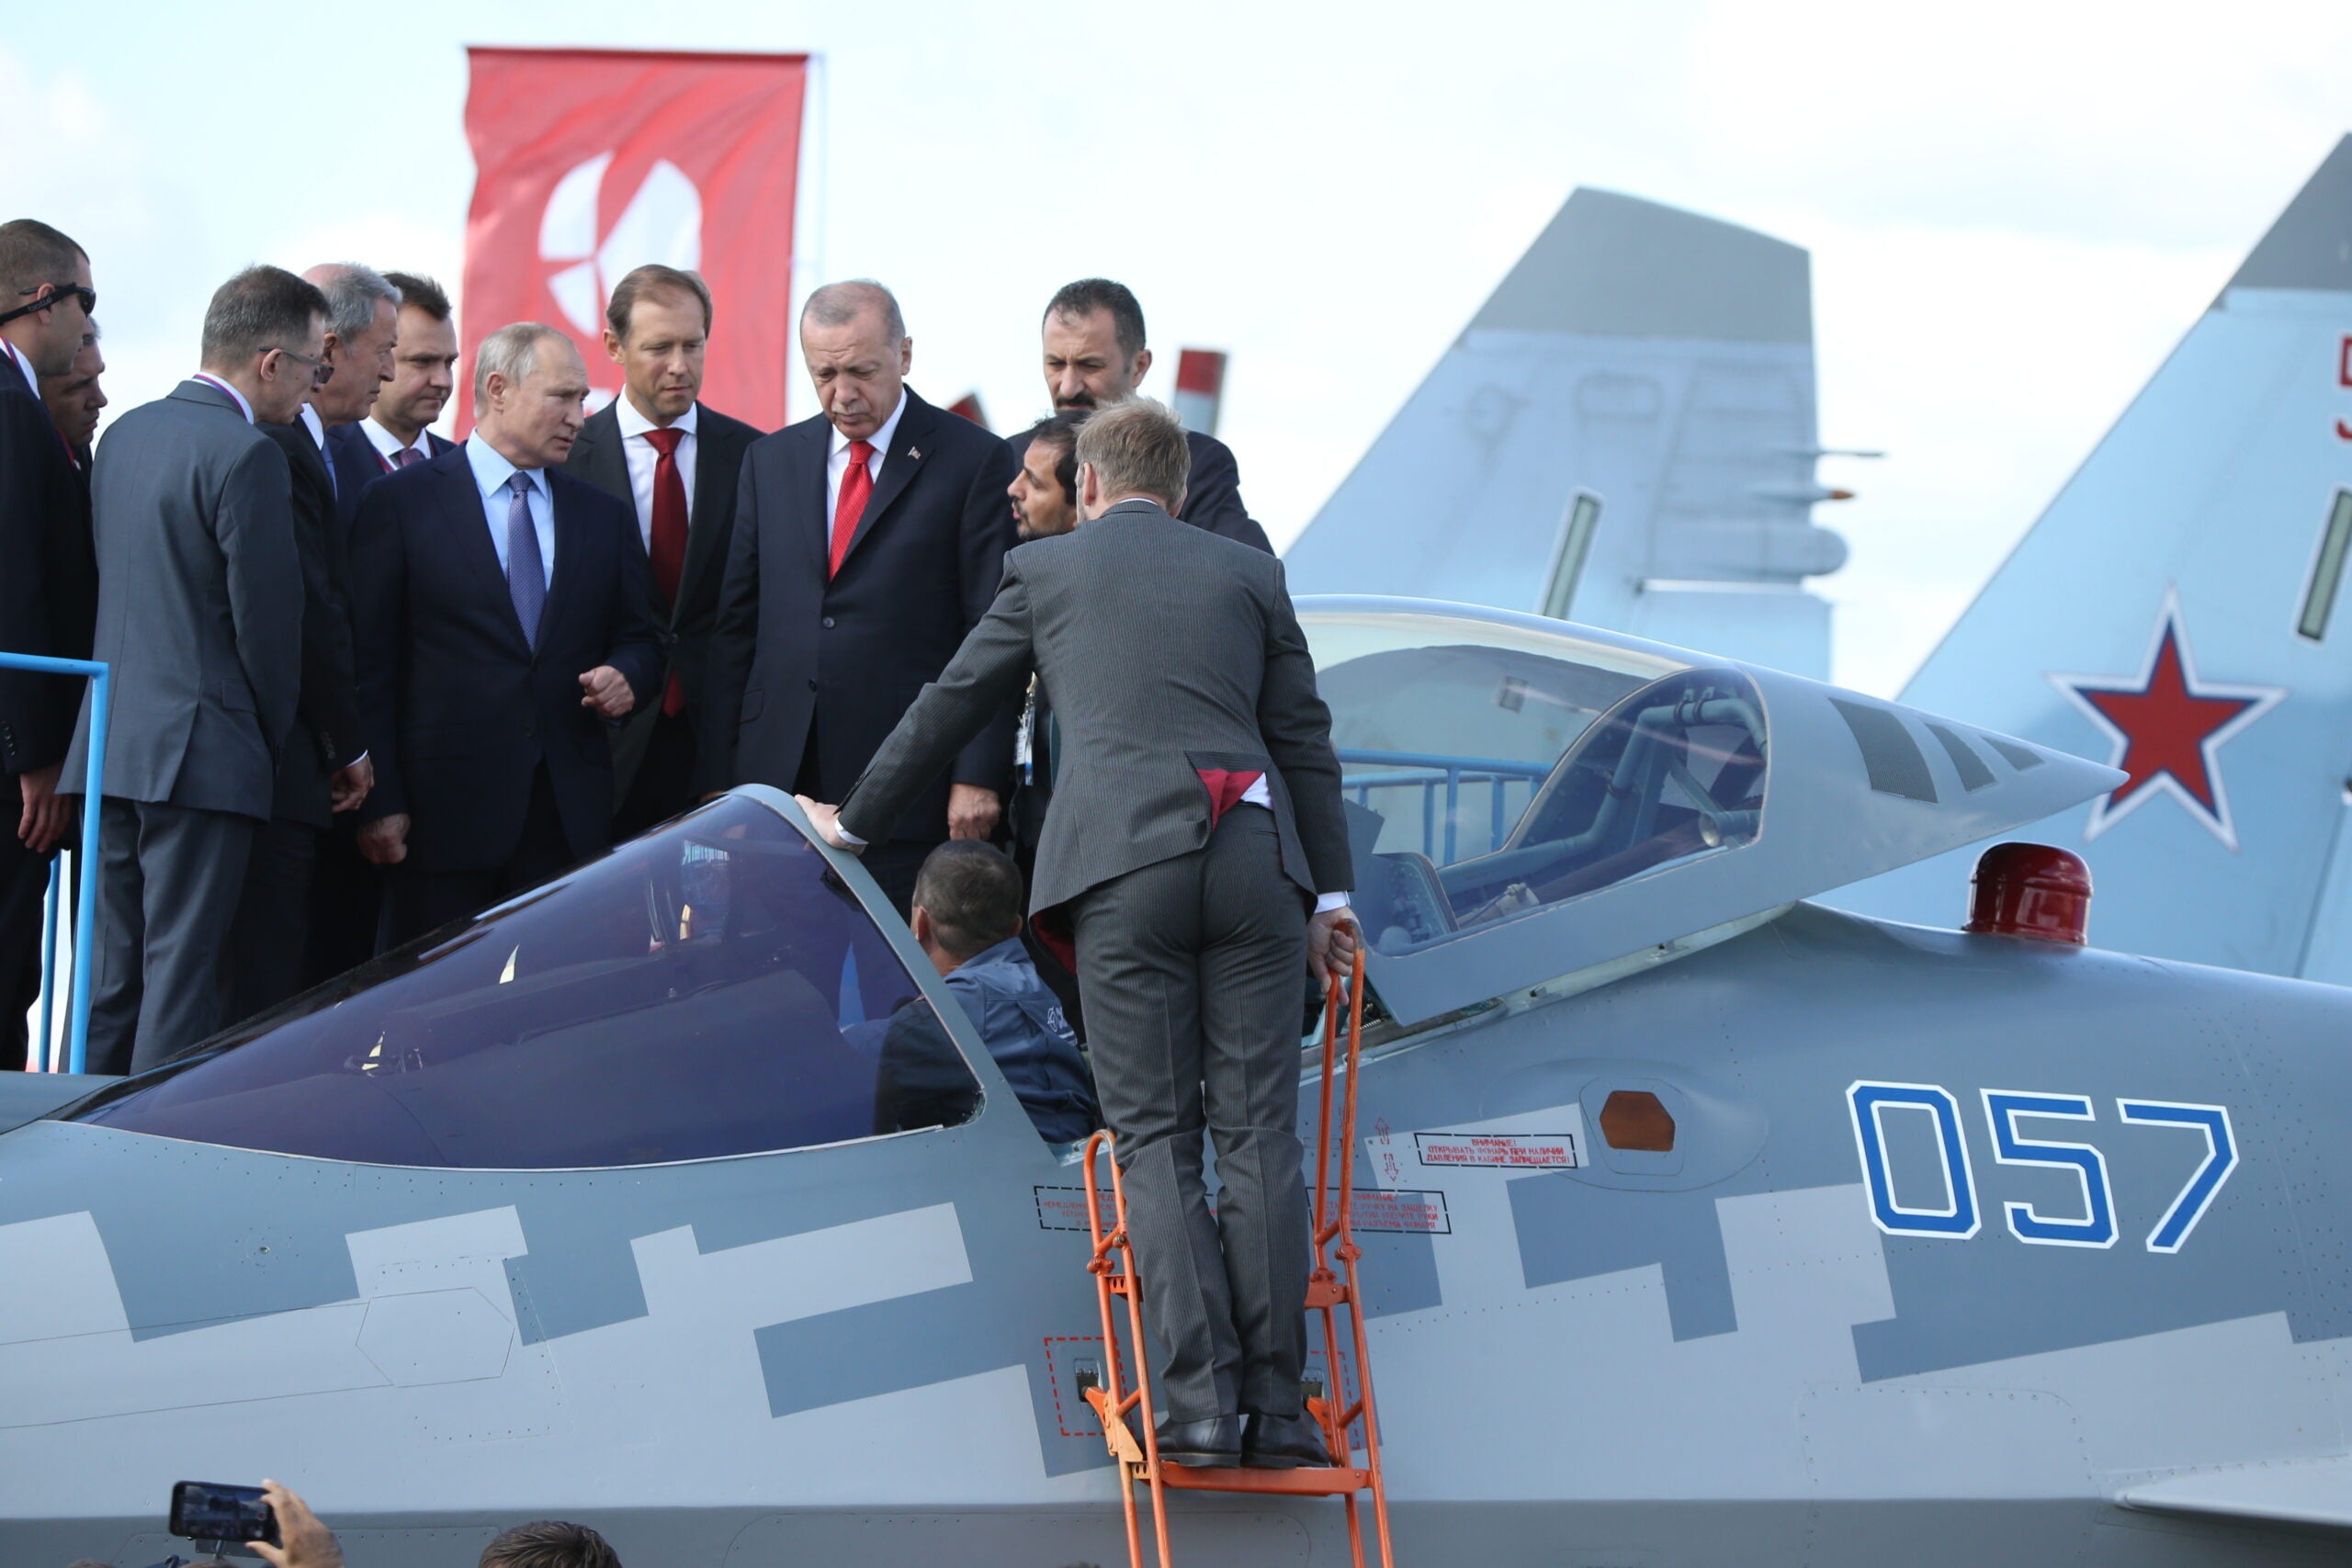 ZHUKOVSKY, RUSSIA - AUGUST 27 (RUSSIA OUT) Russian President Vladimir Putin (L) and Turkish President Recep Tayyip Erdogan (R) observe a new Sukoi SU-57 Jet Fighter while visiting the MAKS 2019 International Aviation and Space Show in Zhukovsky, 40 km. East of Moscow, Russia, August,27,2019. Erdogan is having a one-day visit to Russia. (Photo by Mikhail Svetlov/Getty Images)